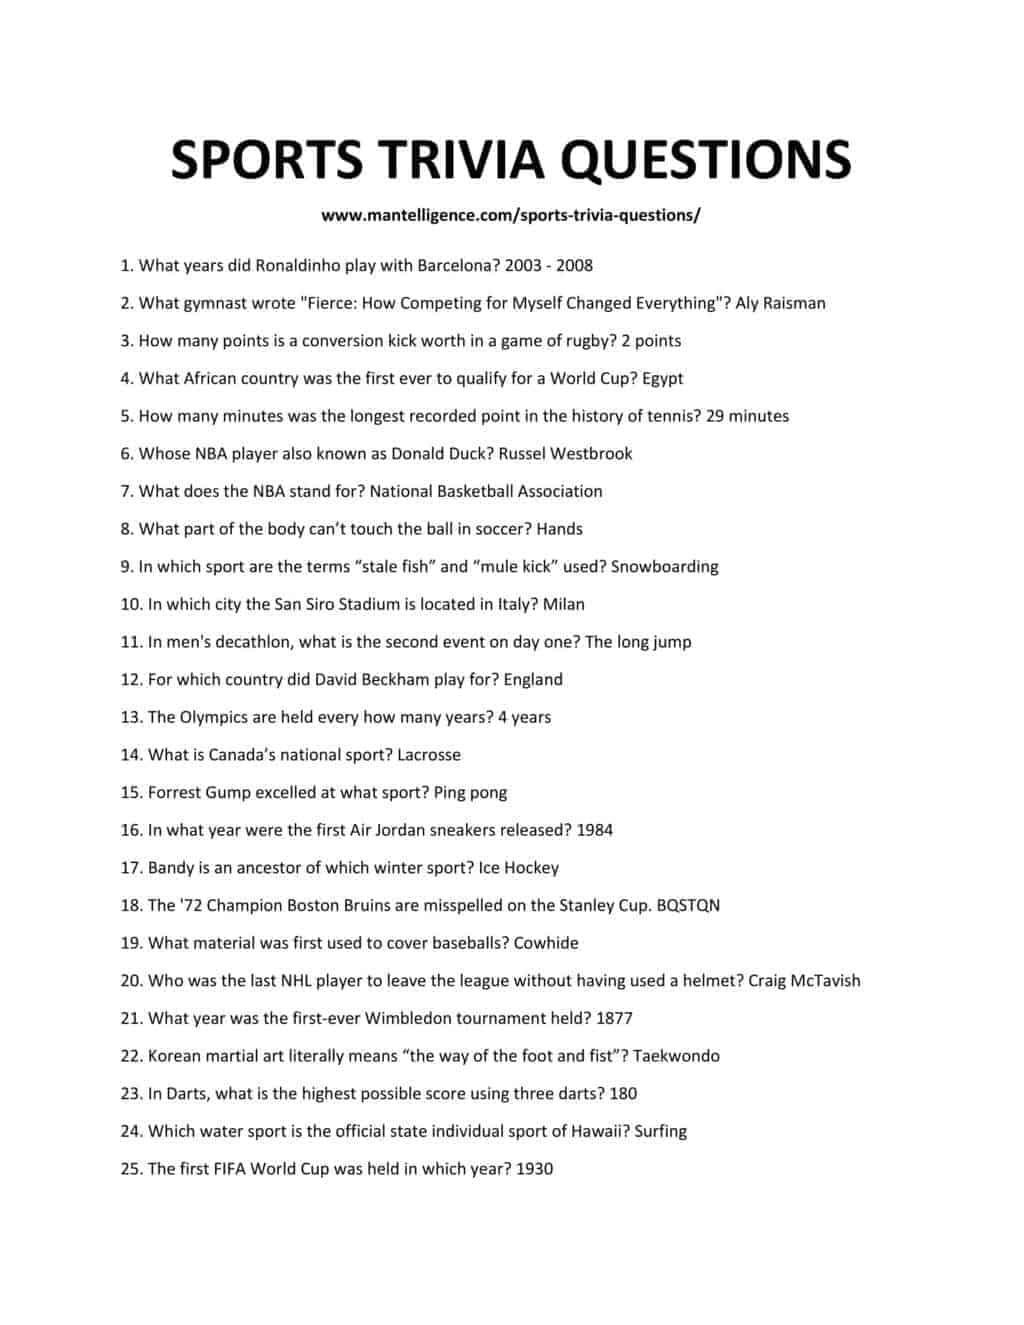 Sports Trivia Questions And Answers Easy Diariosdeumapostcrosser